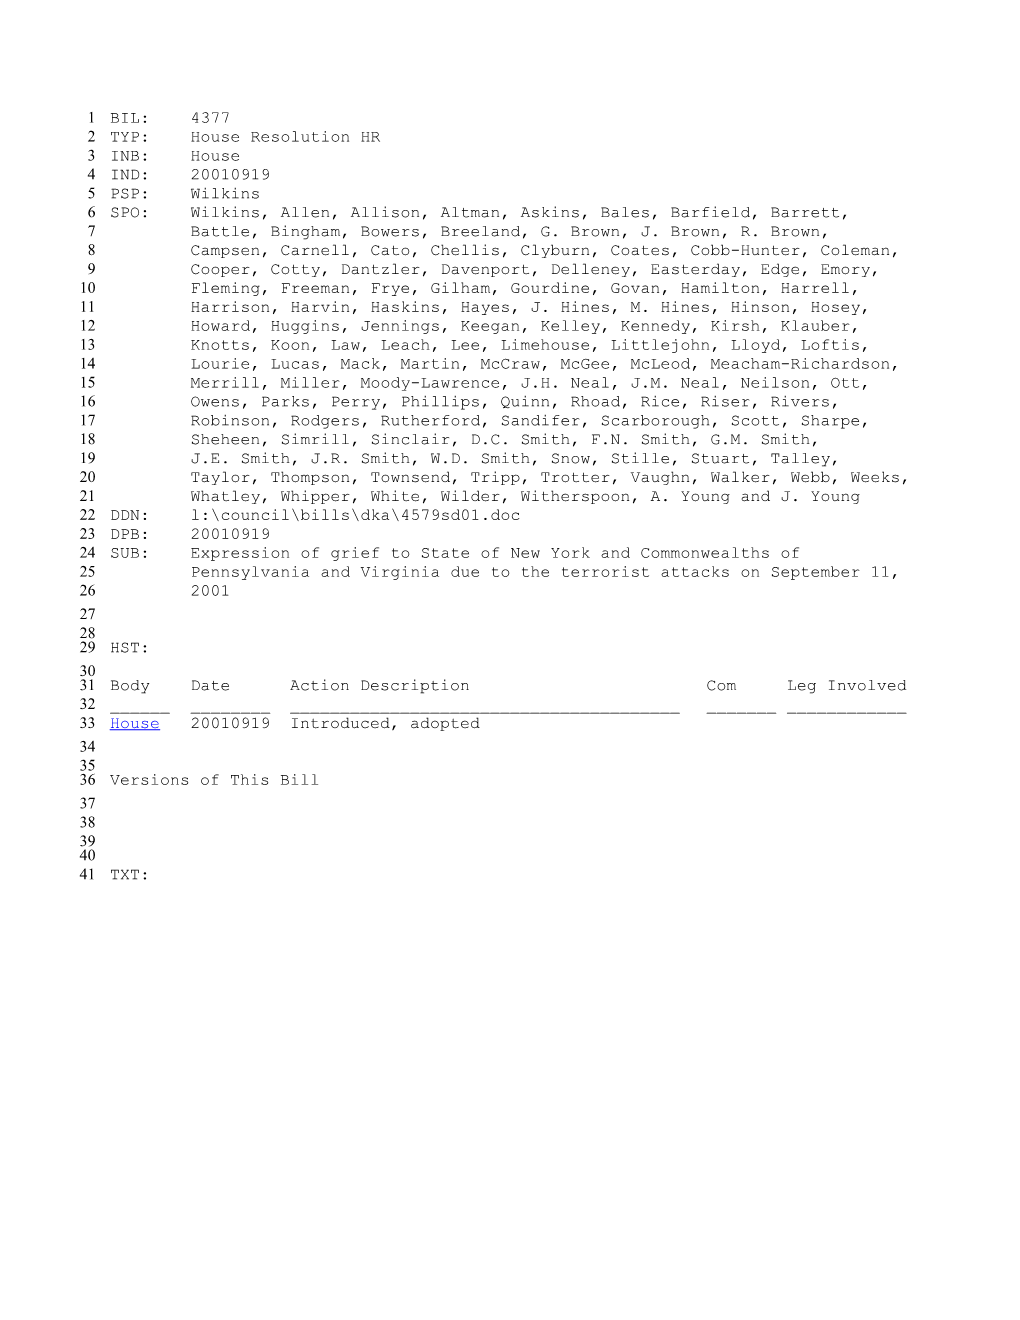 2001-2002 Bill 4377: Expression of Grief to State of New York and Commonwealths of Pennsylvania